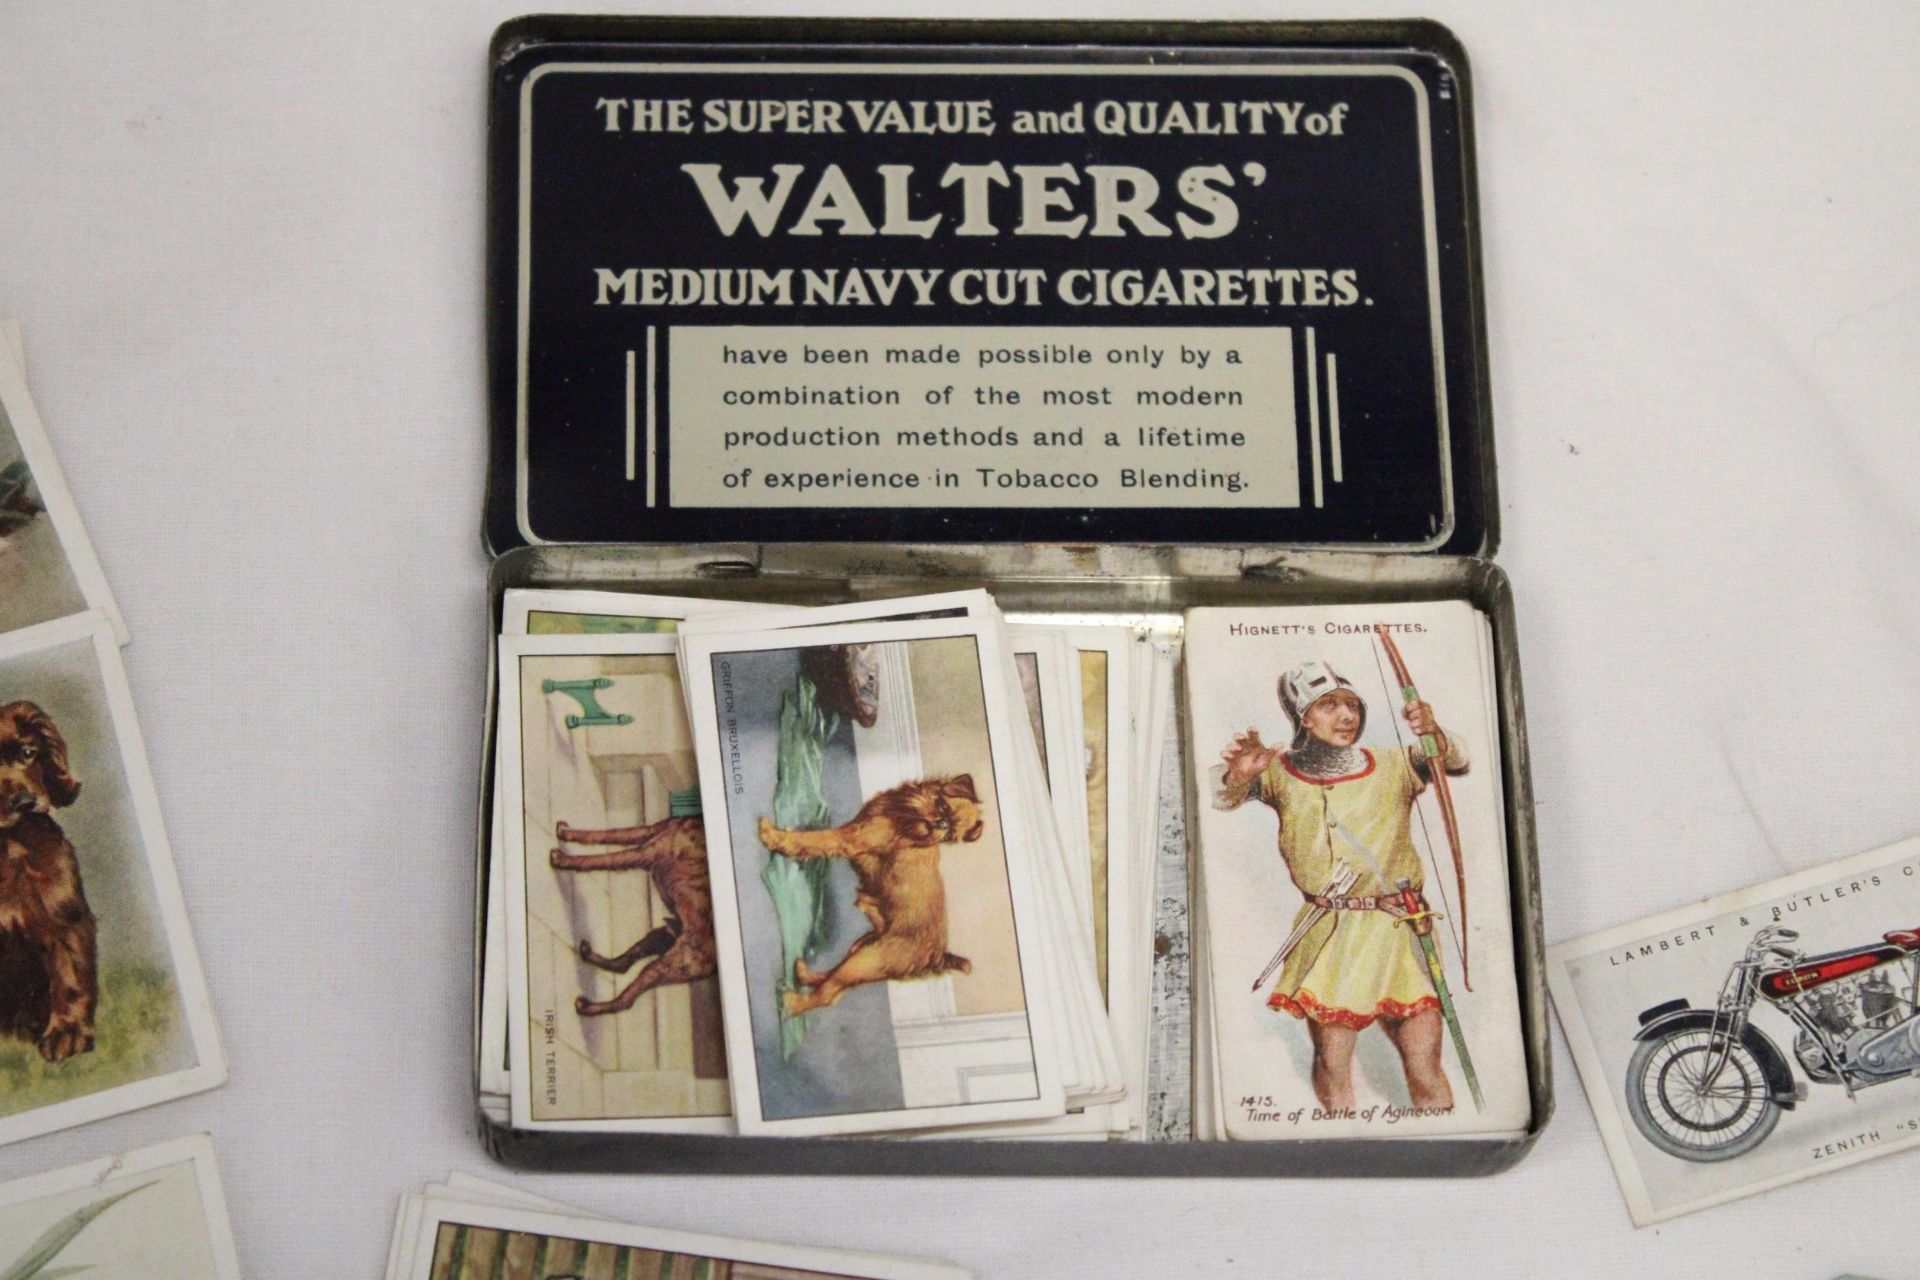 A VINTAGE CIGARETTE TIN CONTAINING CIGARETTE CARDS - Image 2 of 5